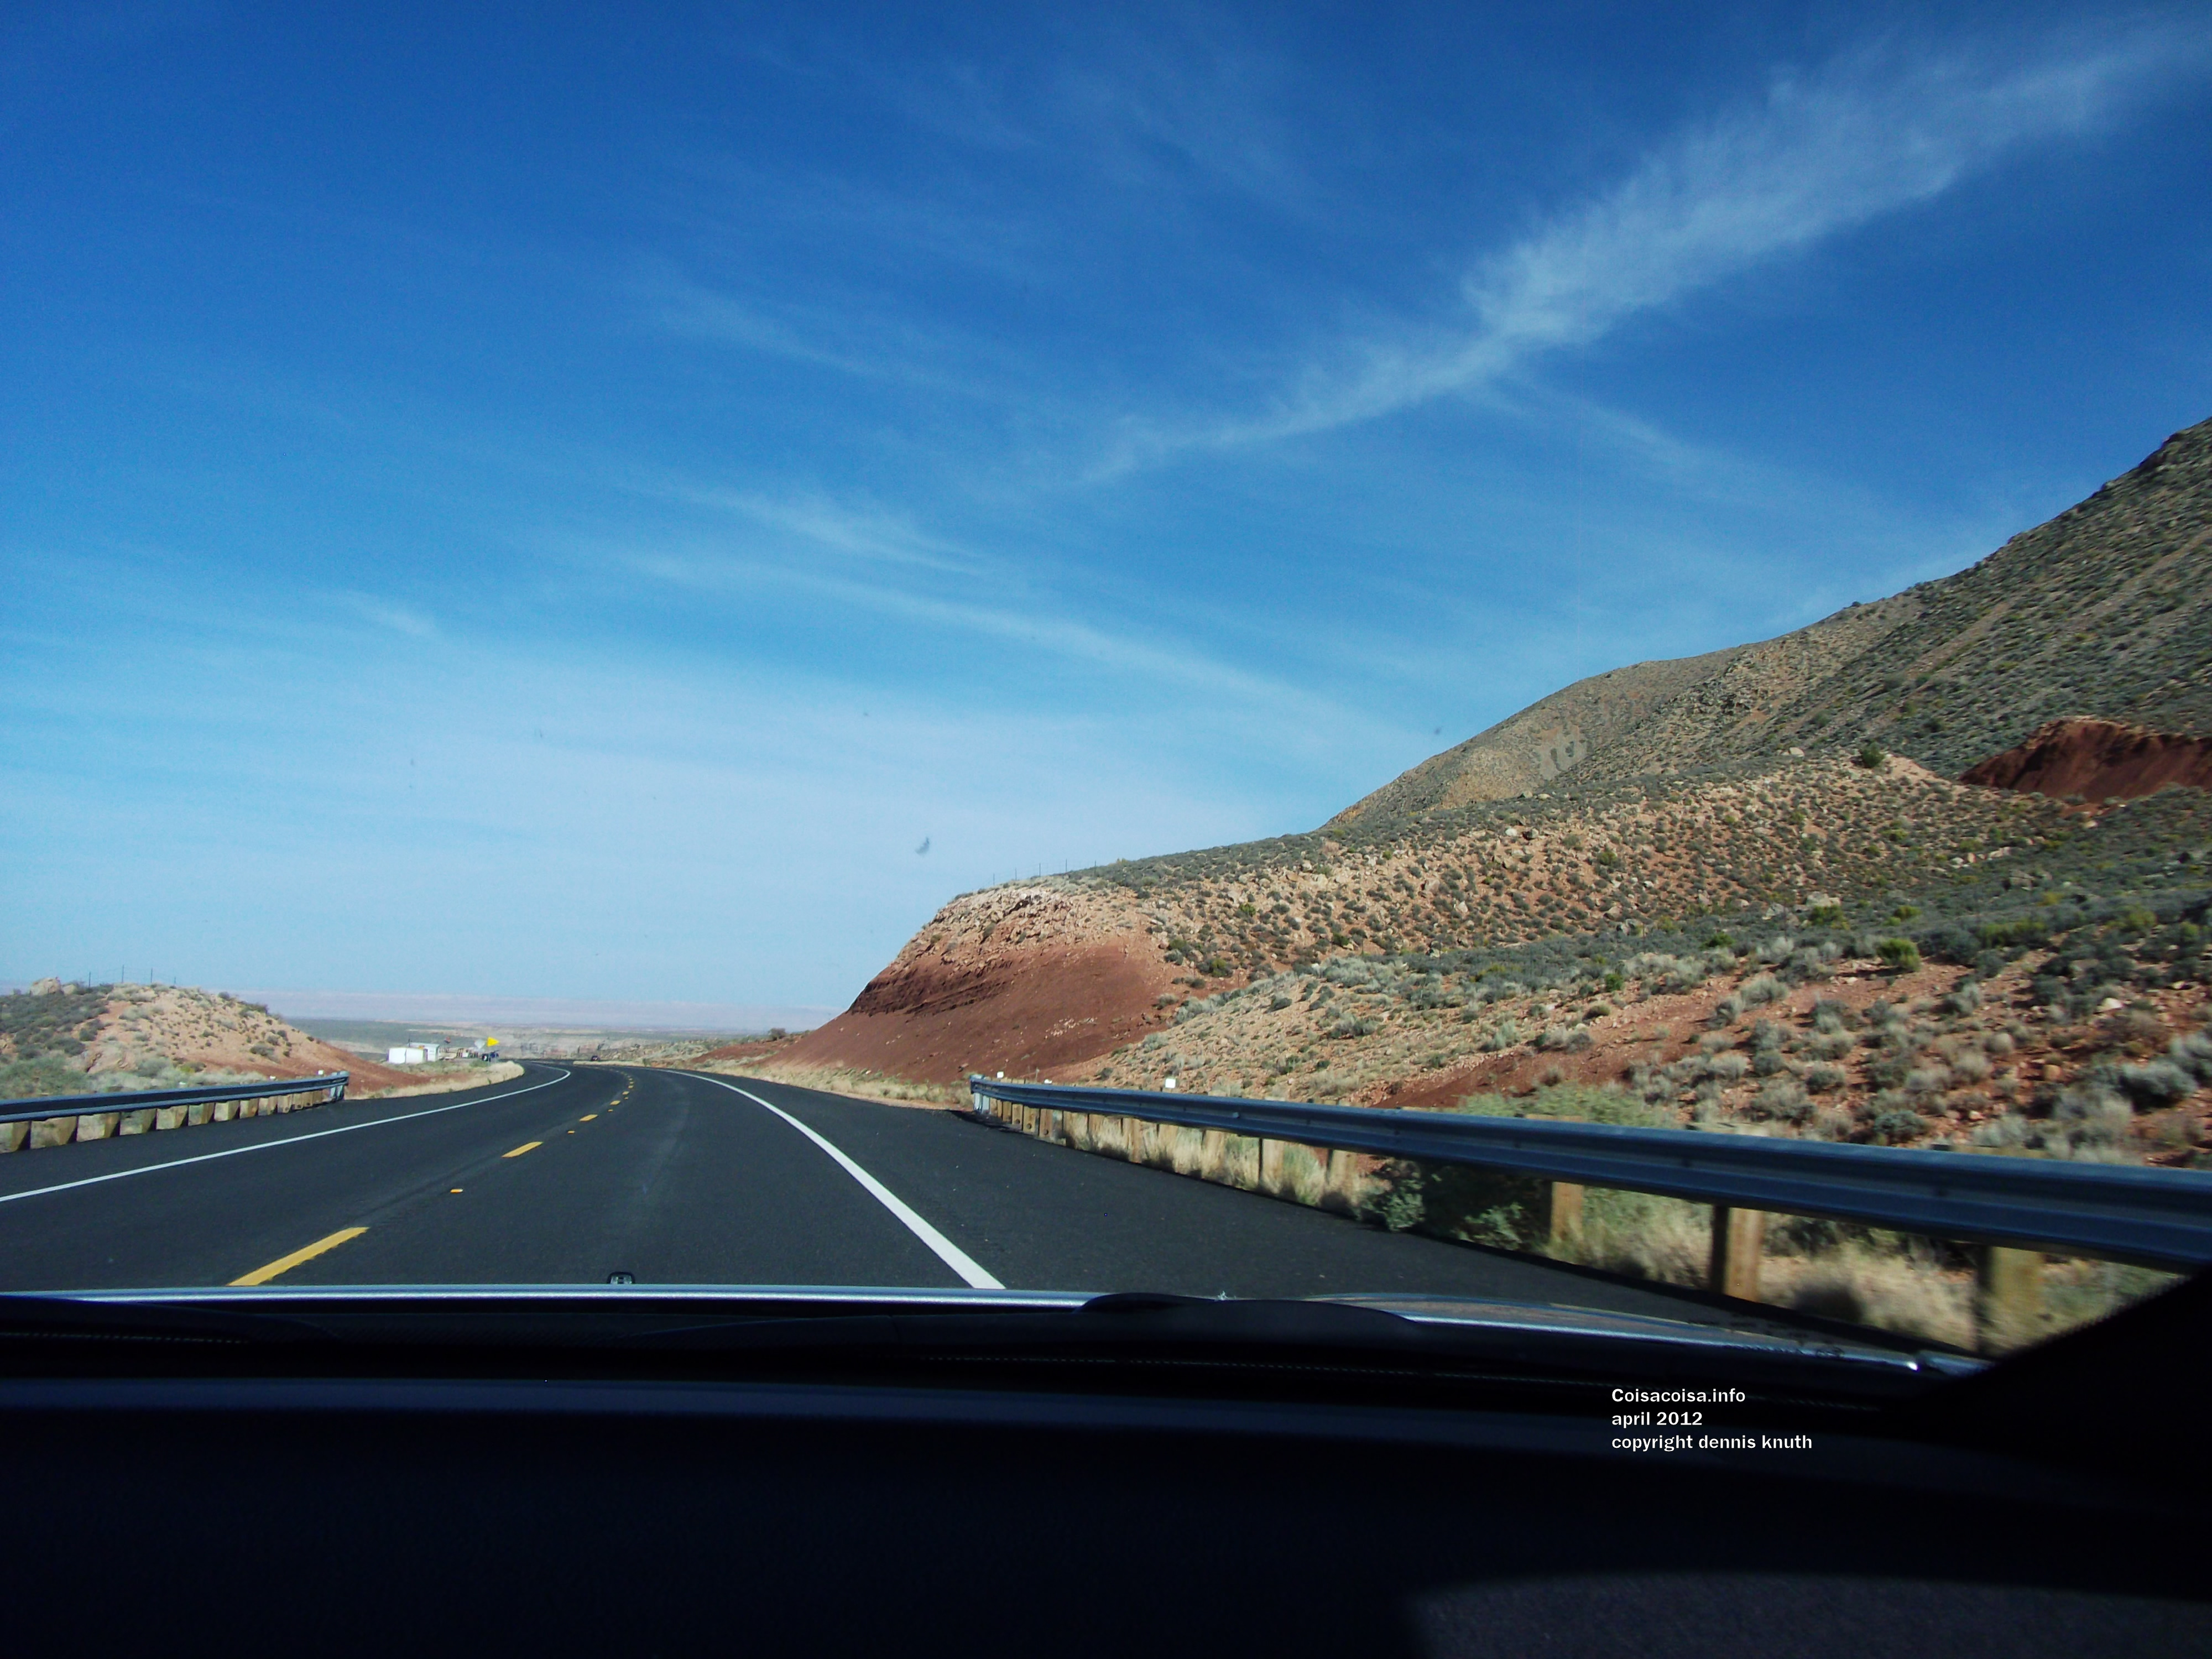 Painted Desert on the Horizon of the Car Dashboard